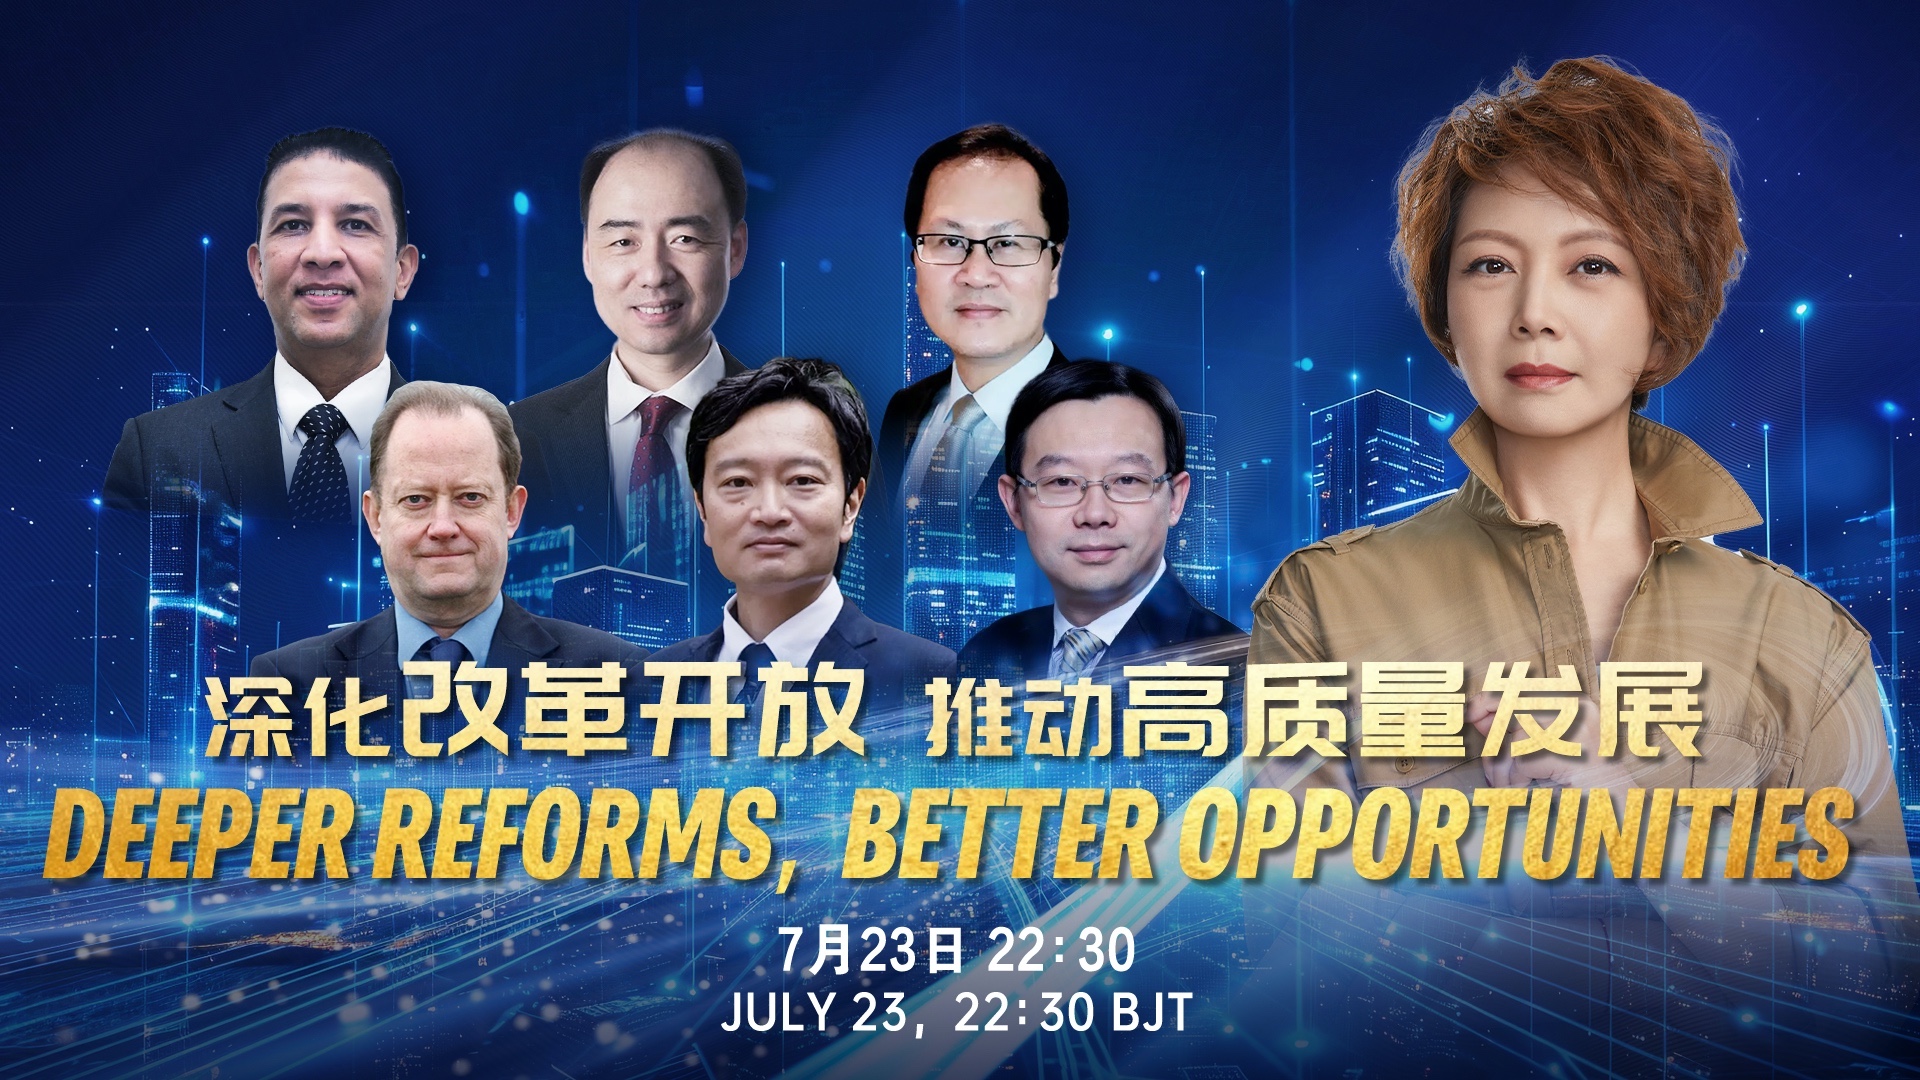 Watch: Roundtable discussion – deeper reforms, better opportunities